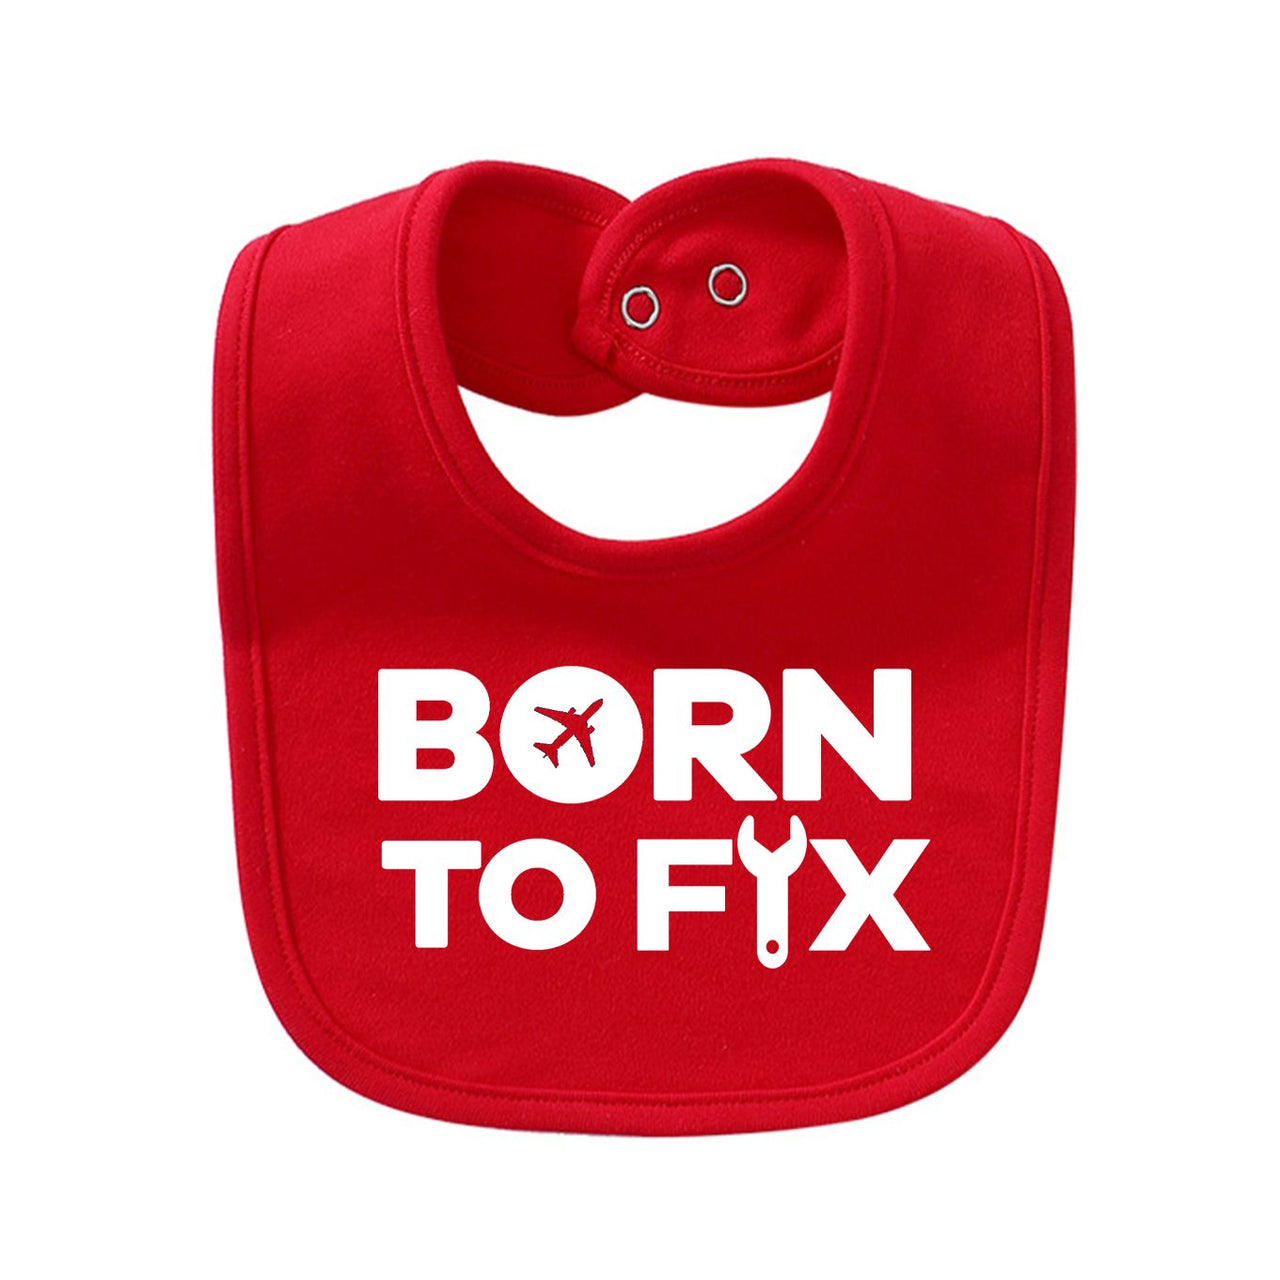 Born To Fix Airplanes Designed Baby Saliva & Feeding Towels